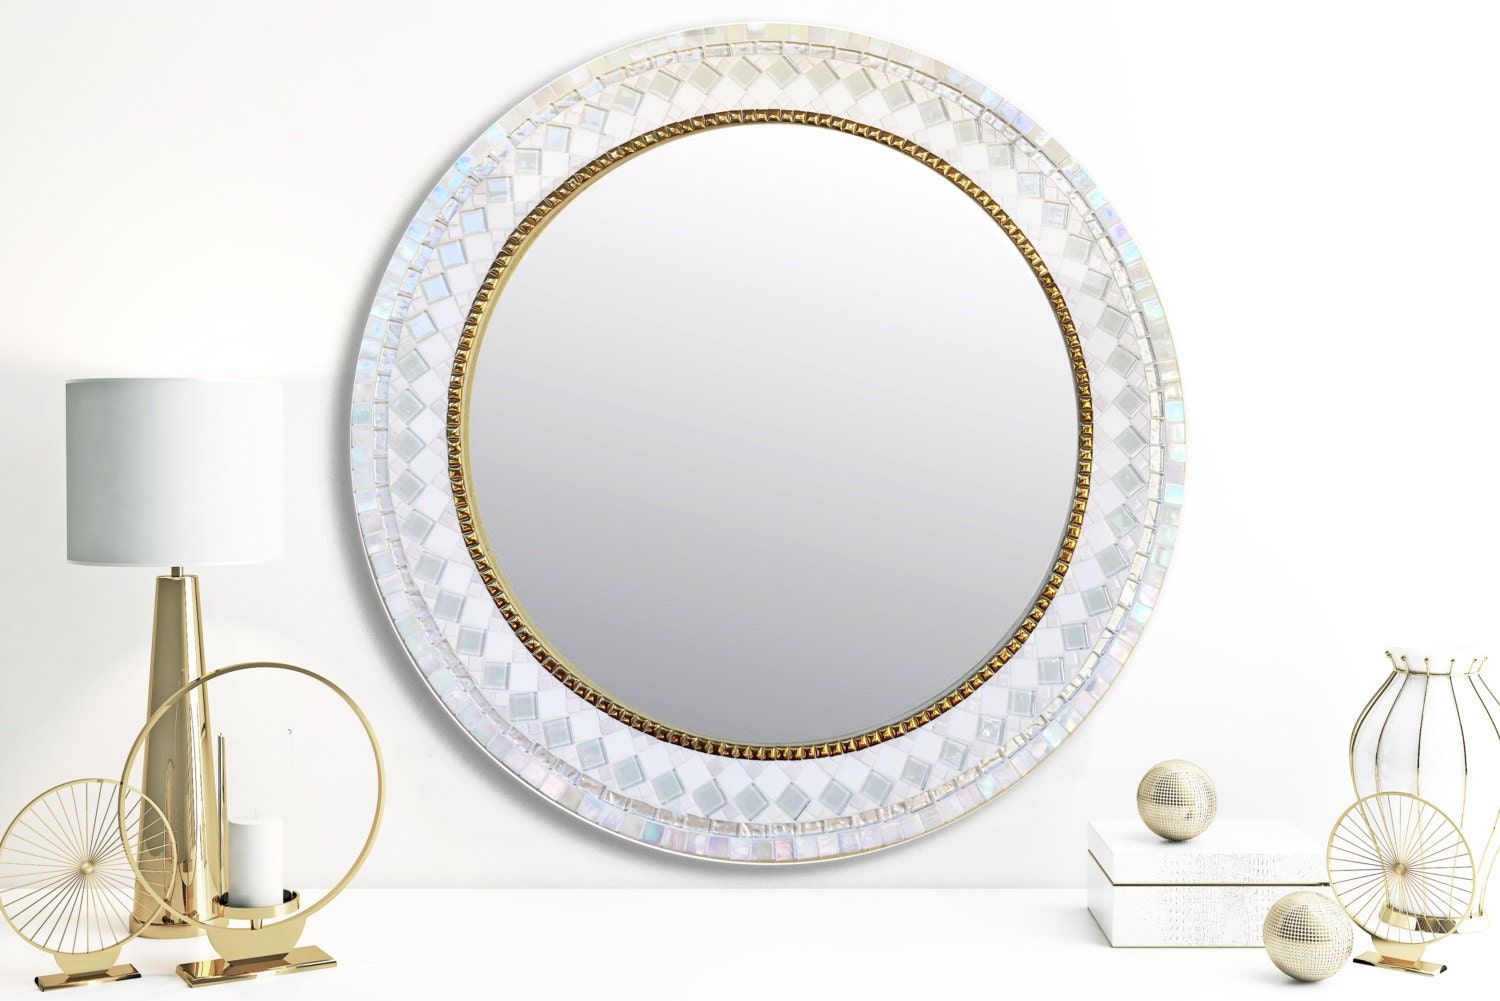 Mosaic Mirror Round Wall Mirror White And Gold Mosaic With Gold Black Rounded Edge Wall Mirrors (View 2 of 15)